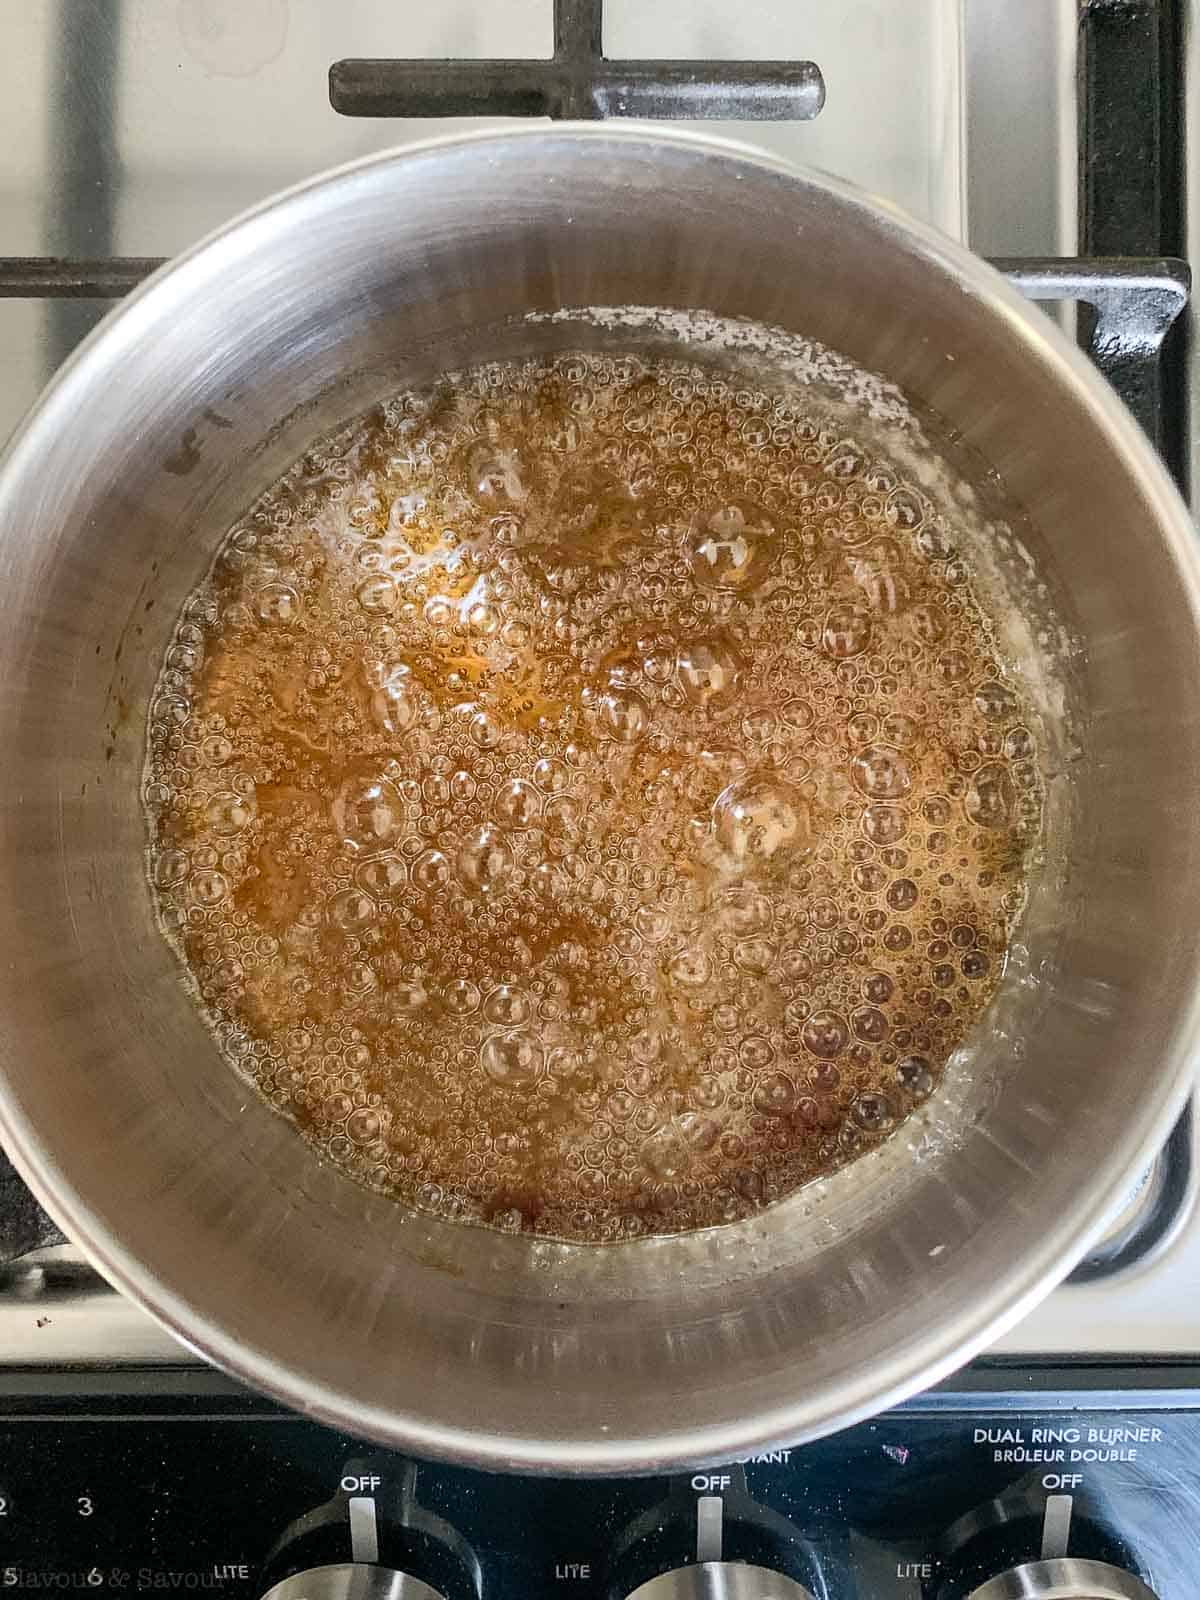 Step 3 to make homemade caramel sauce, boil until it's a deep amber colour.